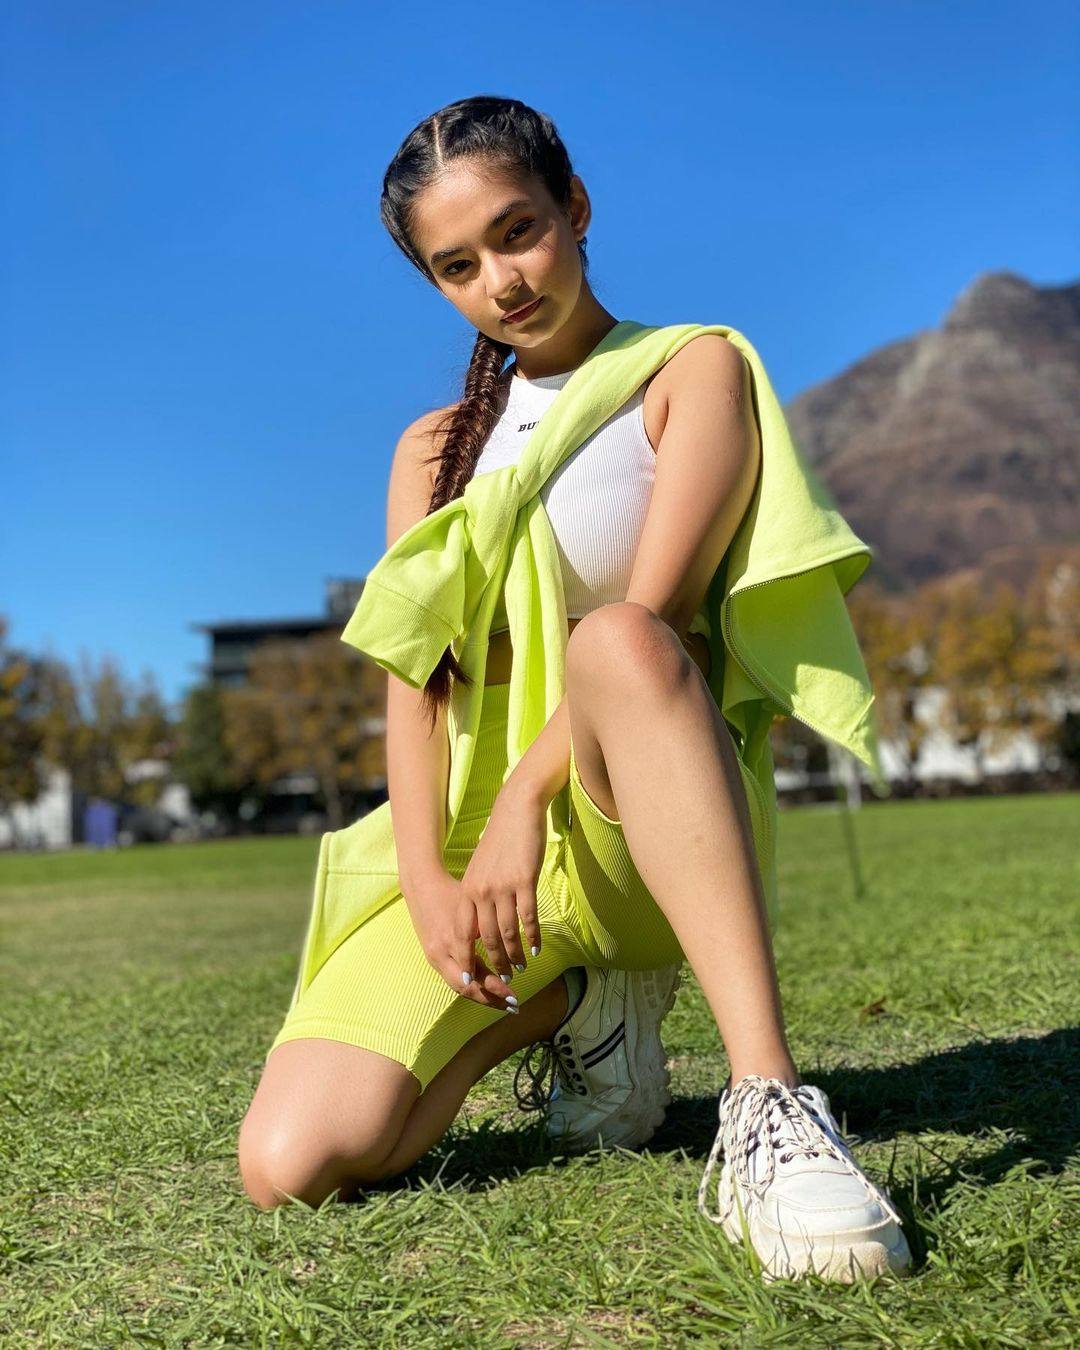 Inside Anushka Sen's fitness and beauty routine â€“ the Bollywood actress and  Indian influencer dishes her skin, hair, diet and wellness tips ... and  don't forget me-time! | South China Morning Post